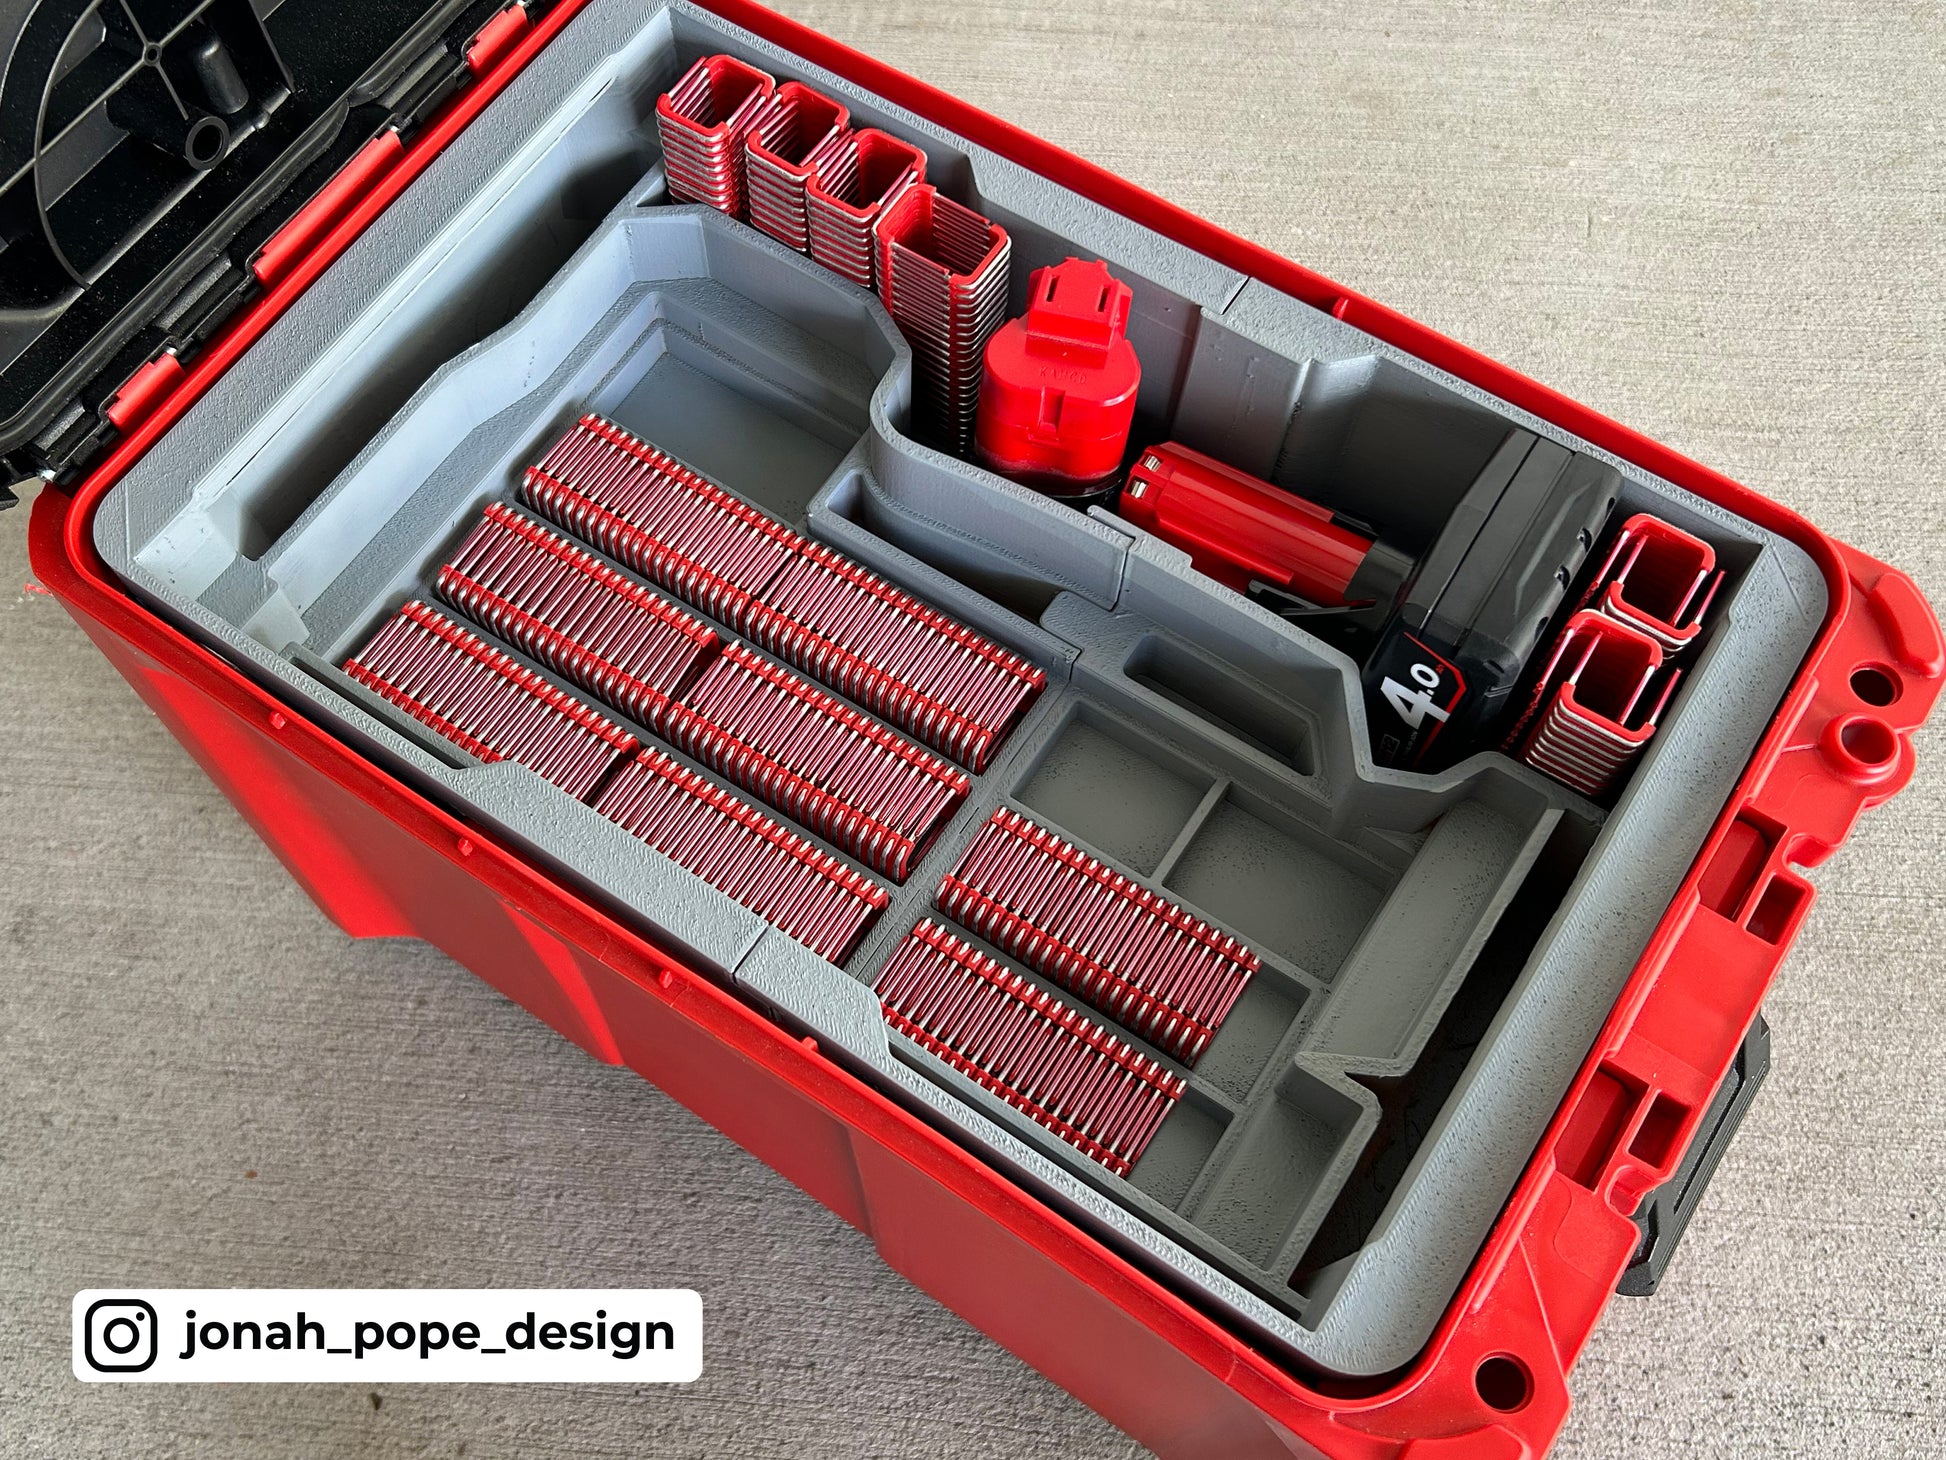 M12 Cable Stapler Insert for Packout Compact Tool Box By Jonah